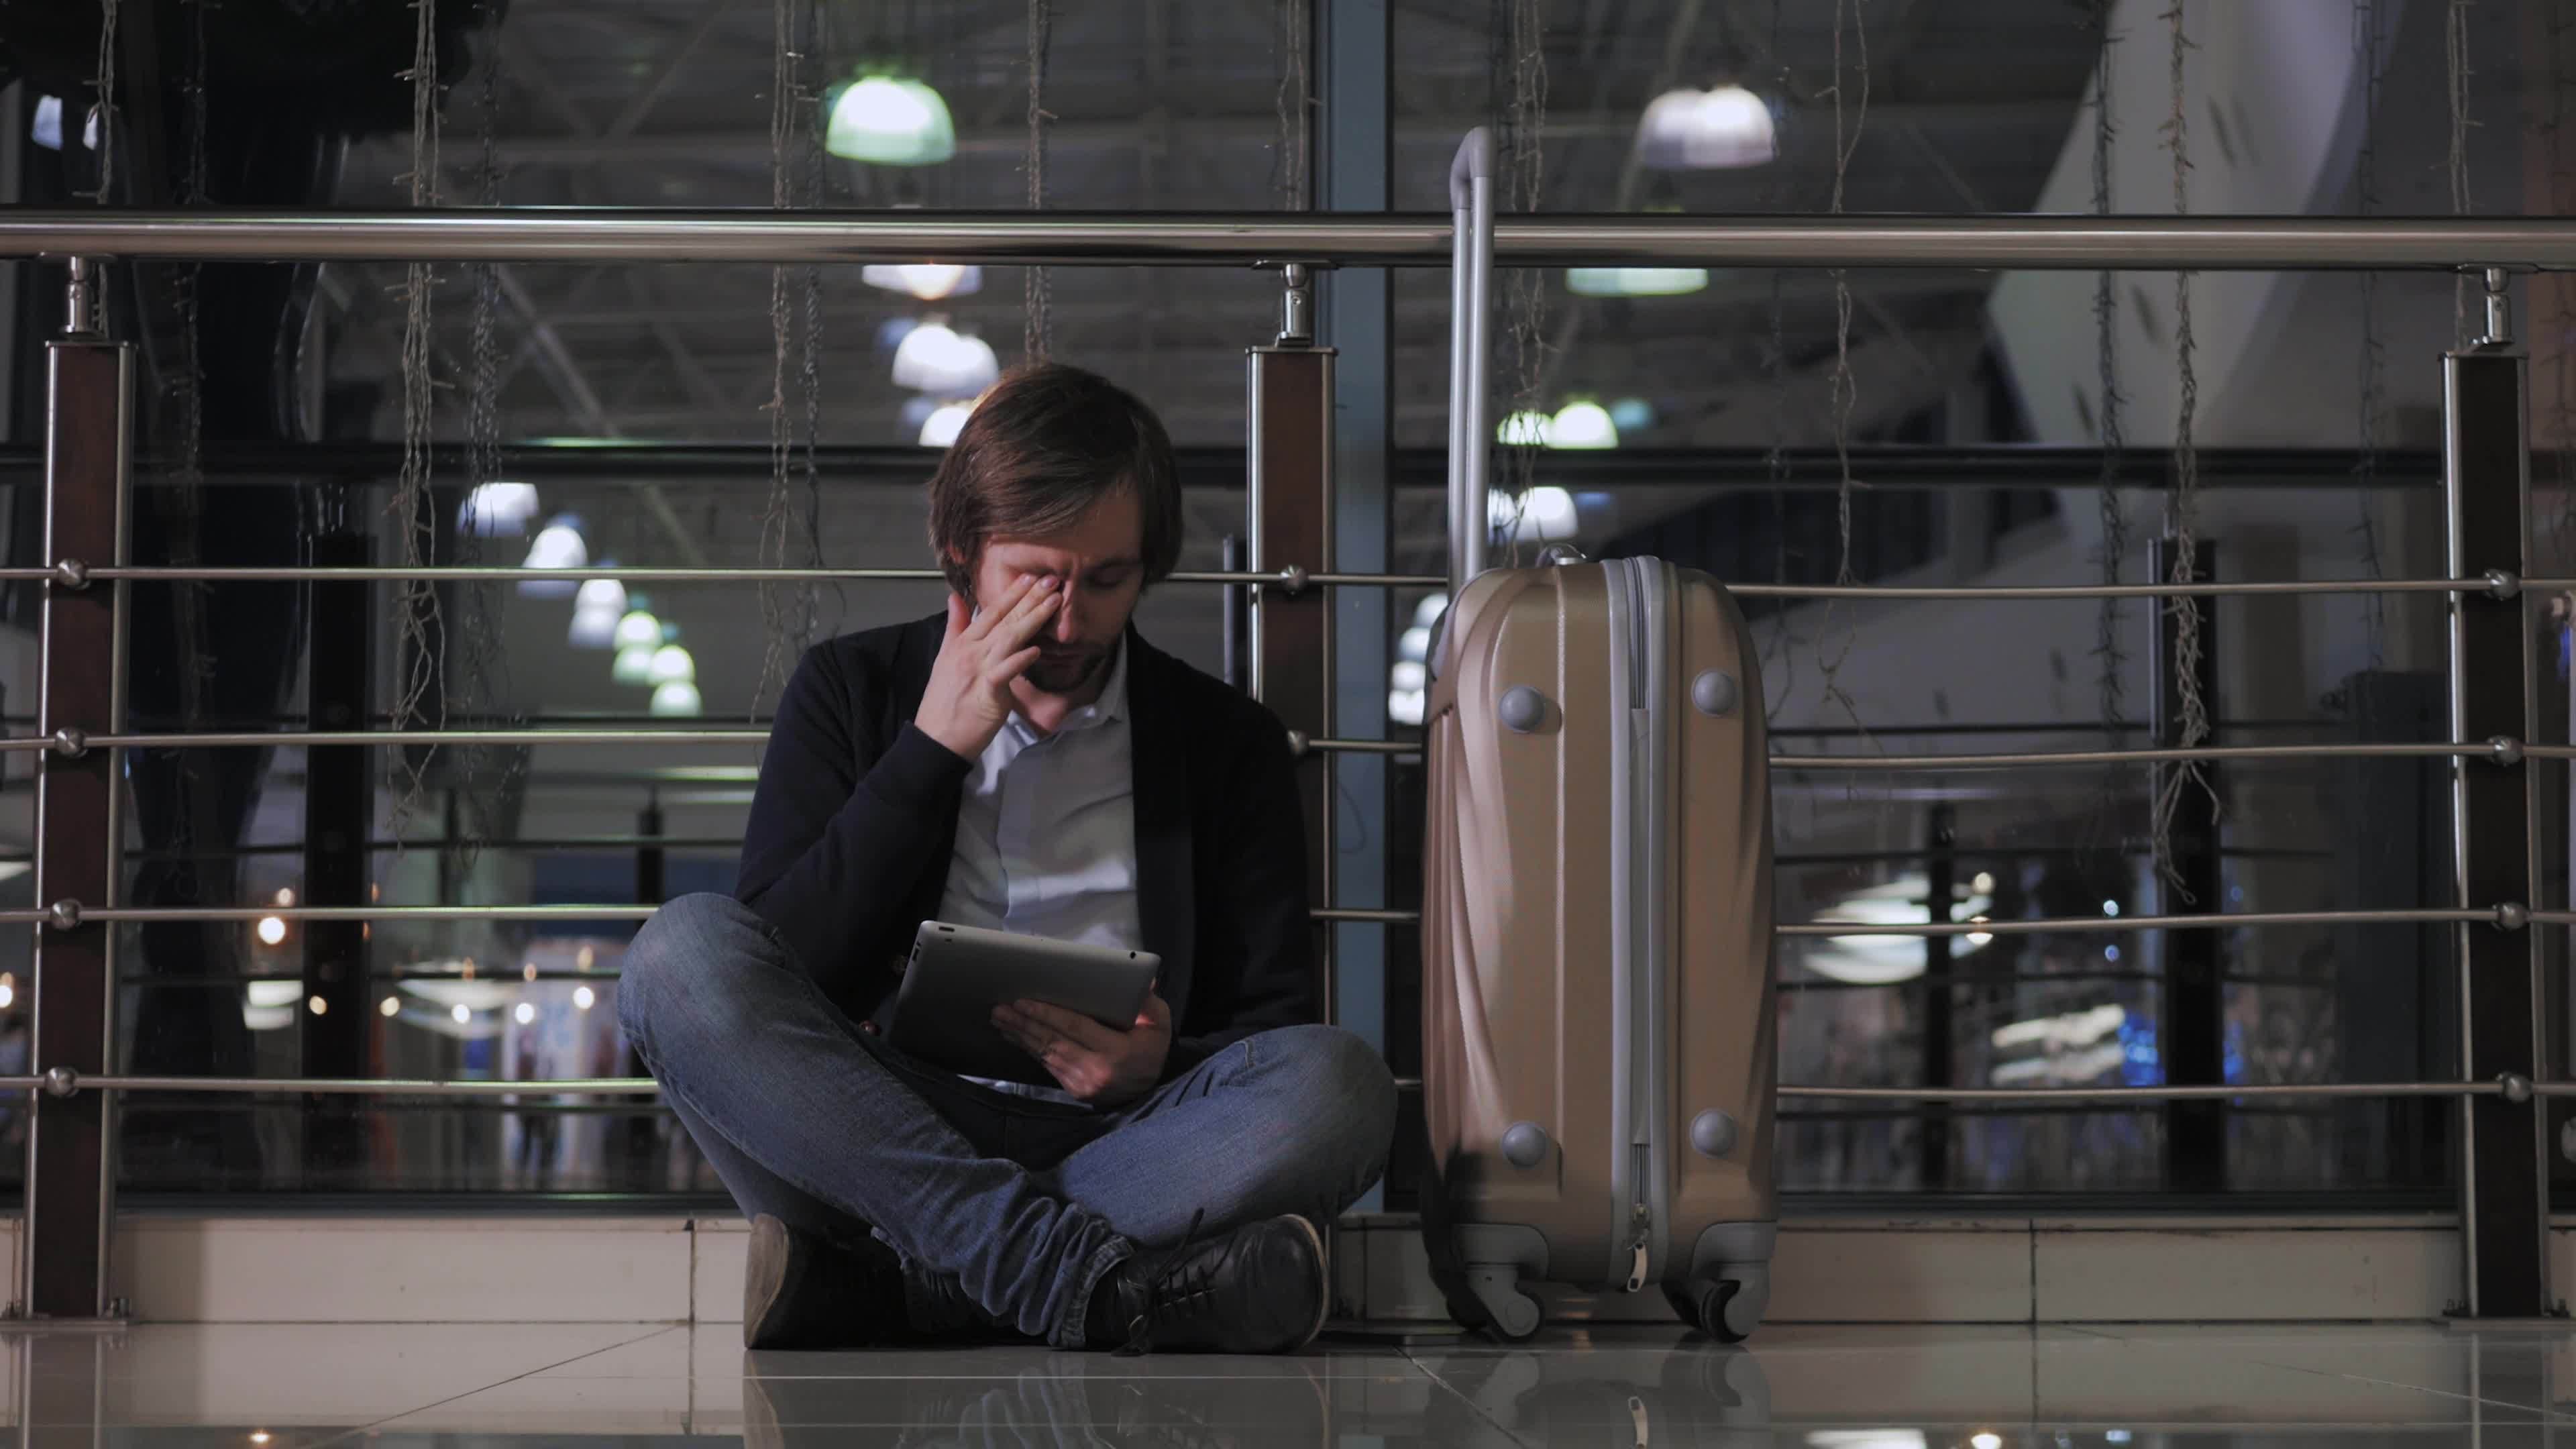 A passenger with his luggage sitting in an airport during the night 